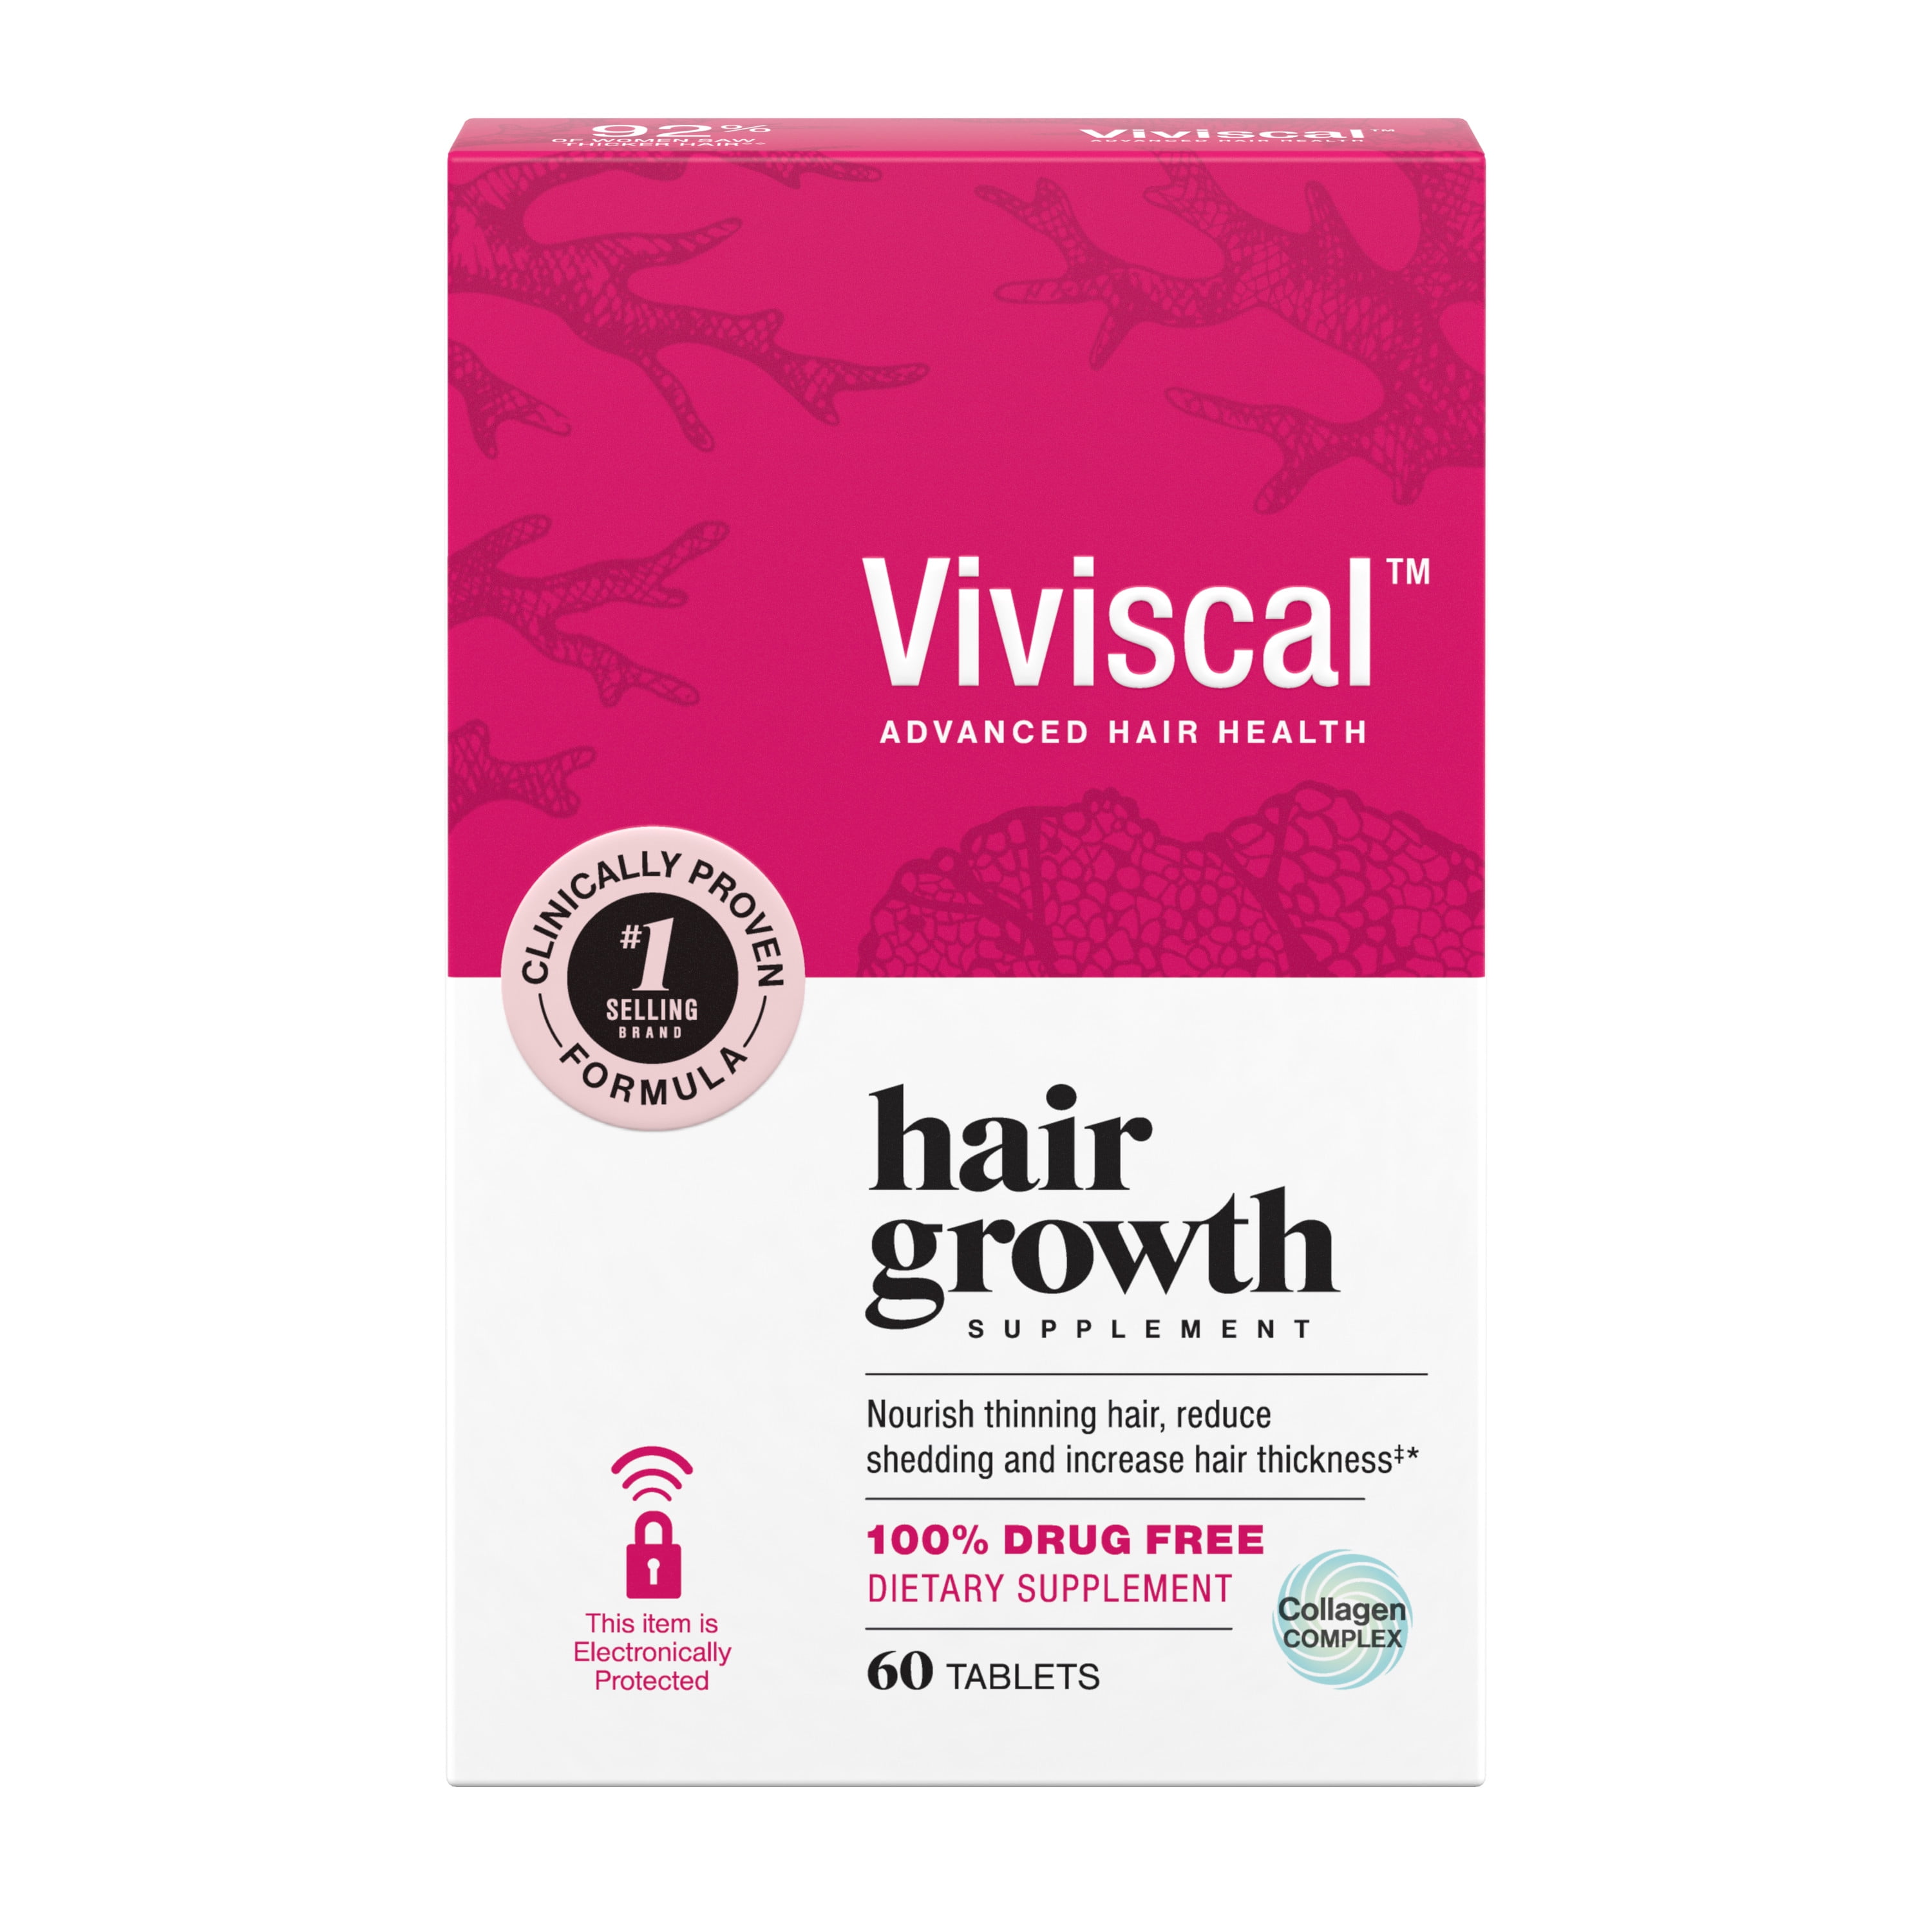 Viviscal Women's Hair Growth Supplements for Thicker, Fuller Hair | Clinically Proven with Proprietary Collagen Complex | 60 Tablets - 1 Month Supply